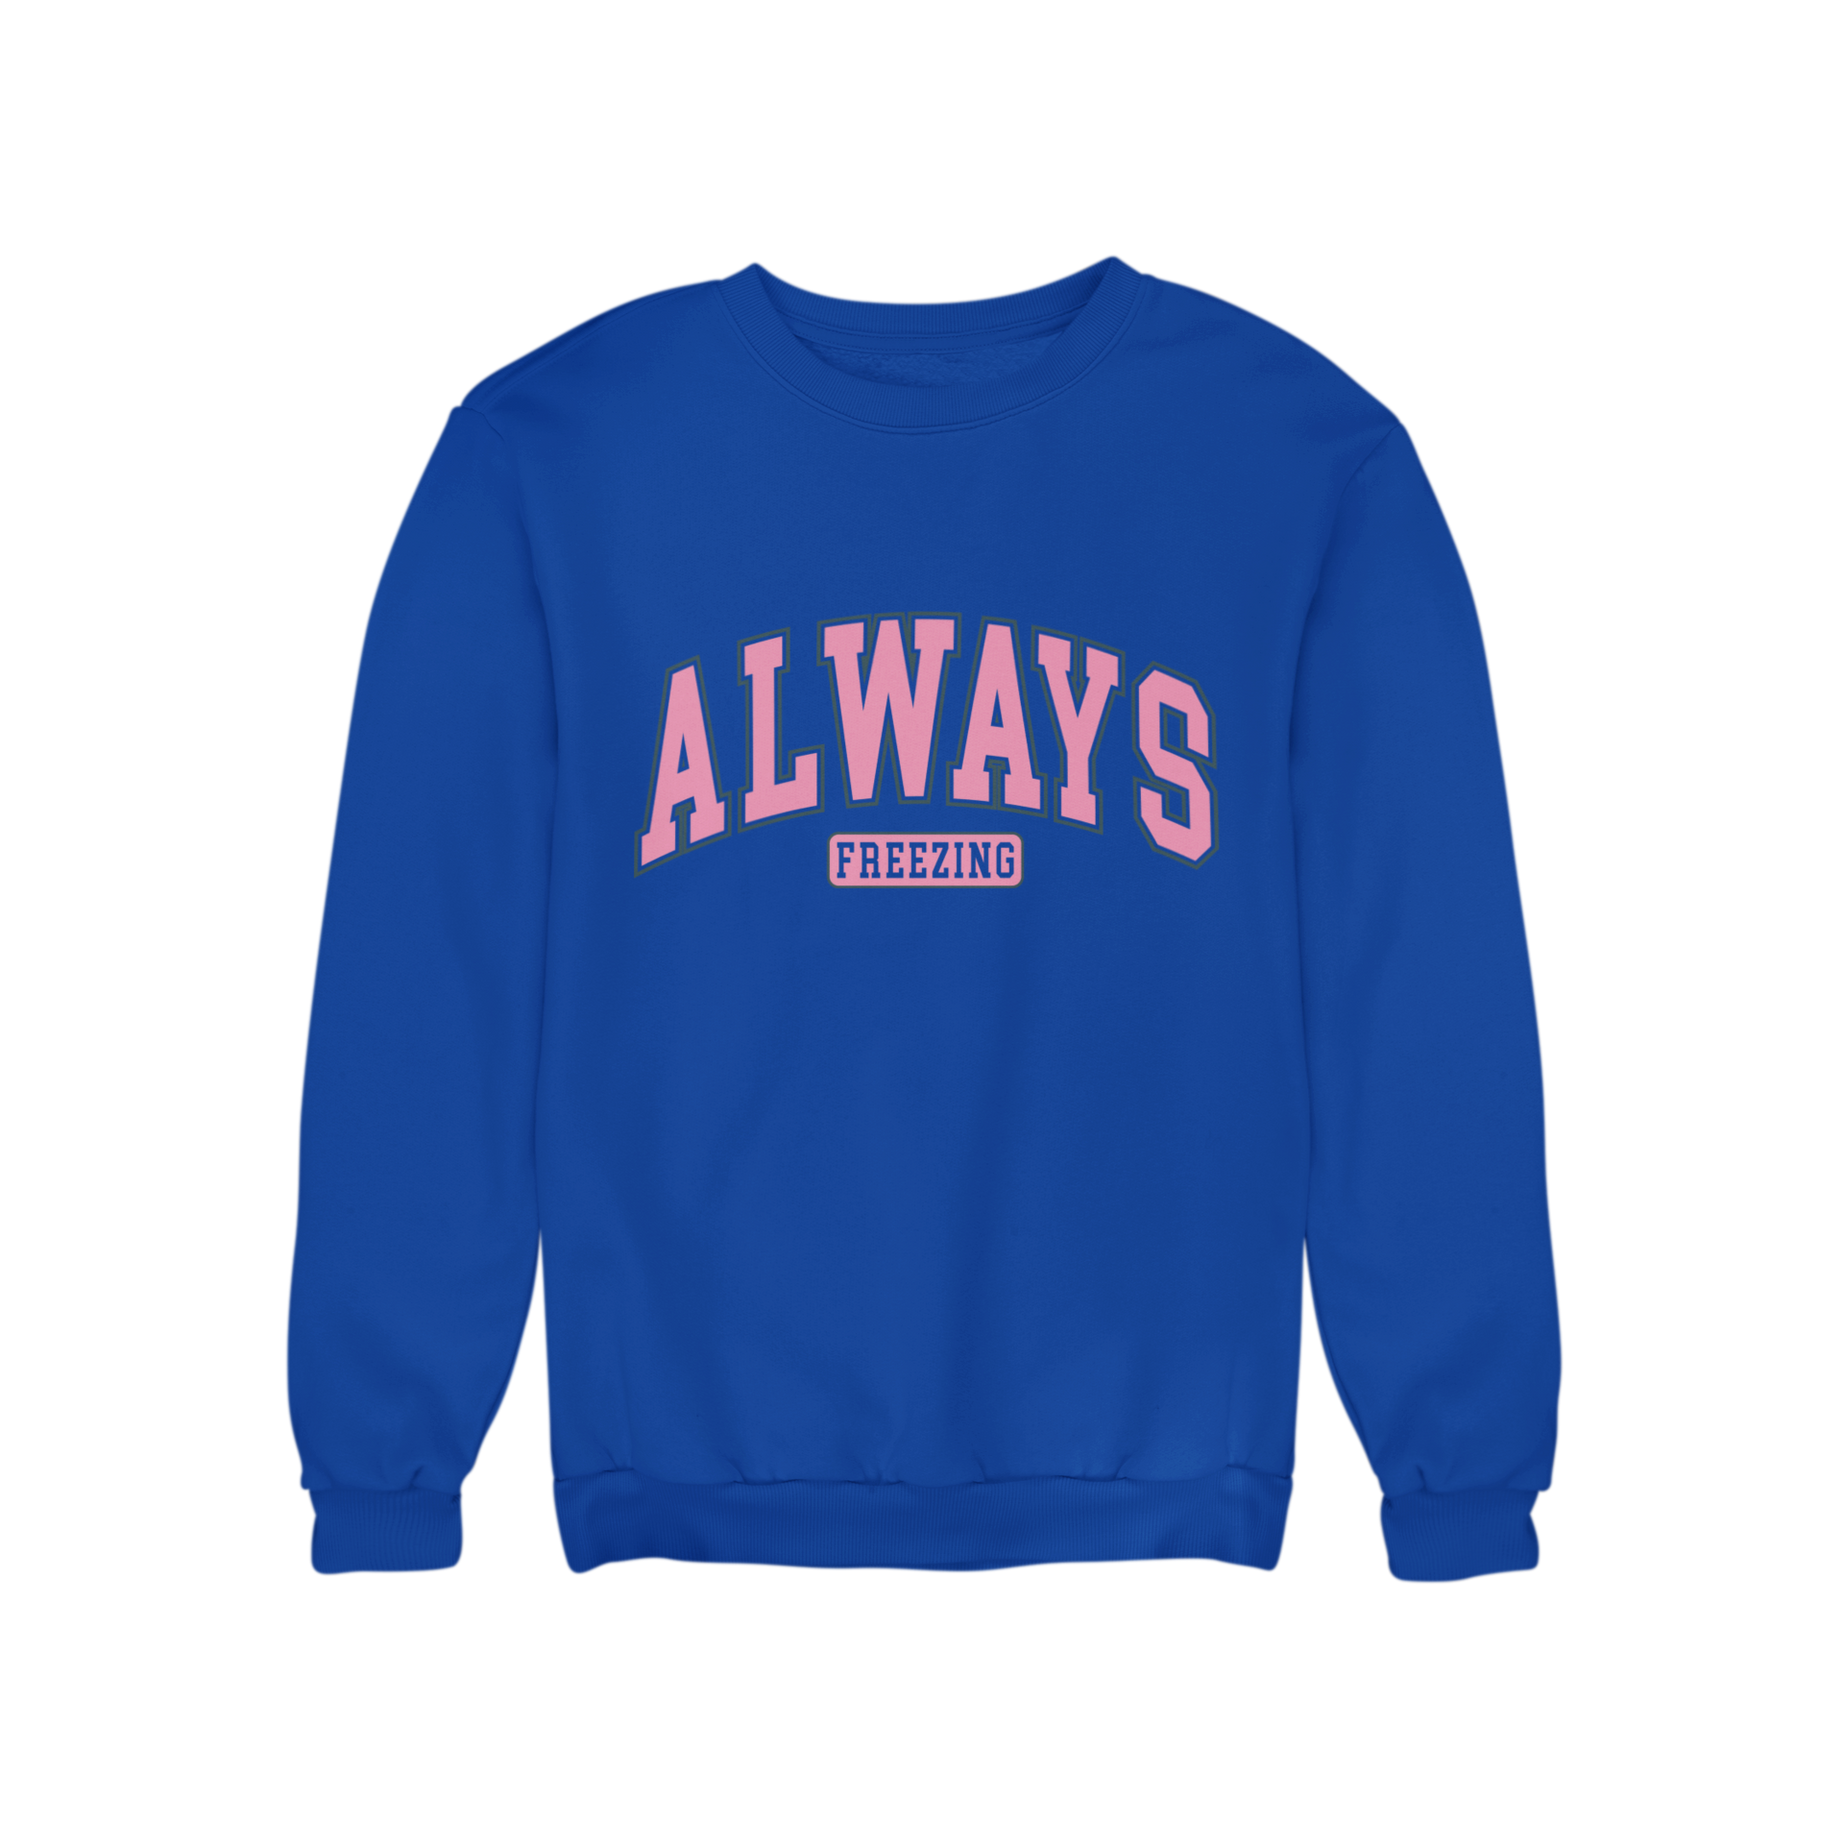 The Always Freezing 2 Jumper features a slogan sweatshirt, with a trendy and eye-catching pink print. This quality and stylish jumper is sure to keep you warm and looking sharp.